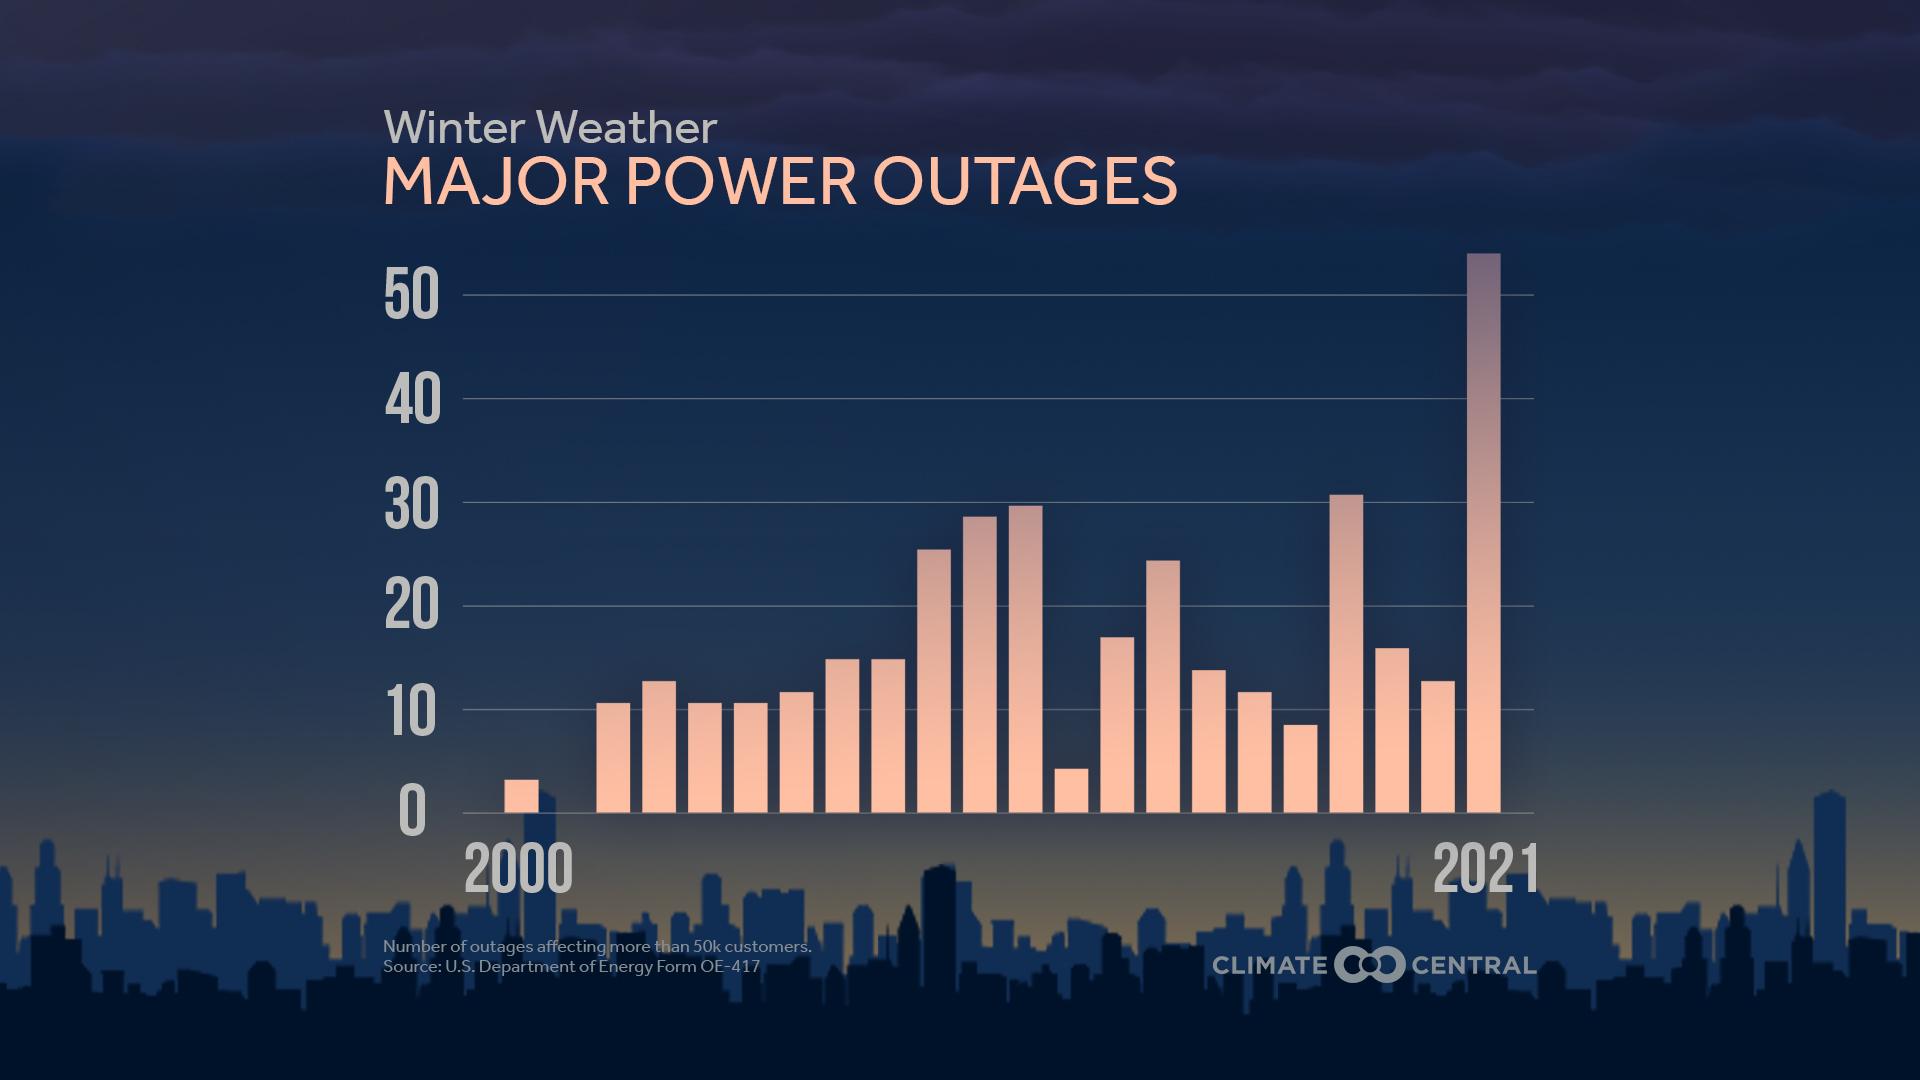 CM: Outages by Weather Type - Winter Weather